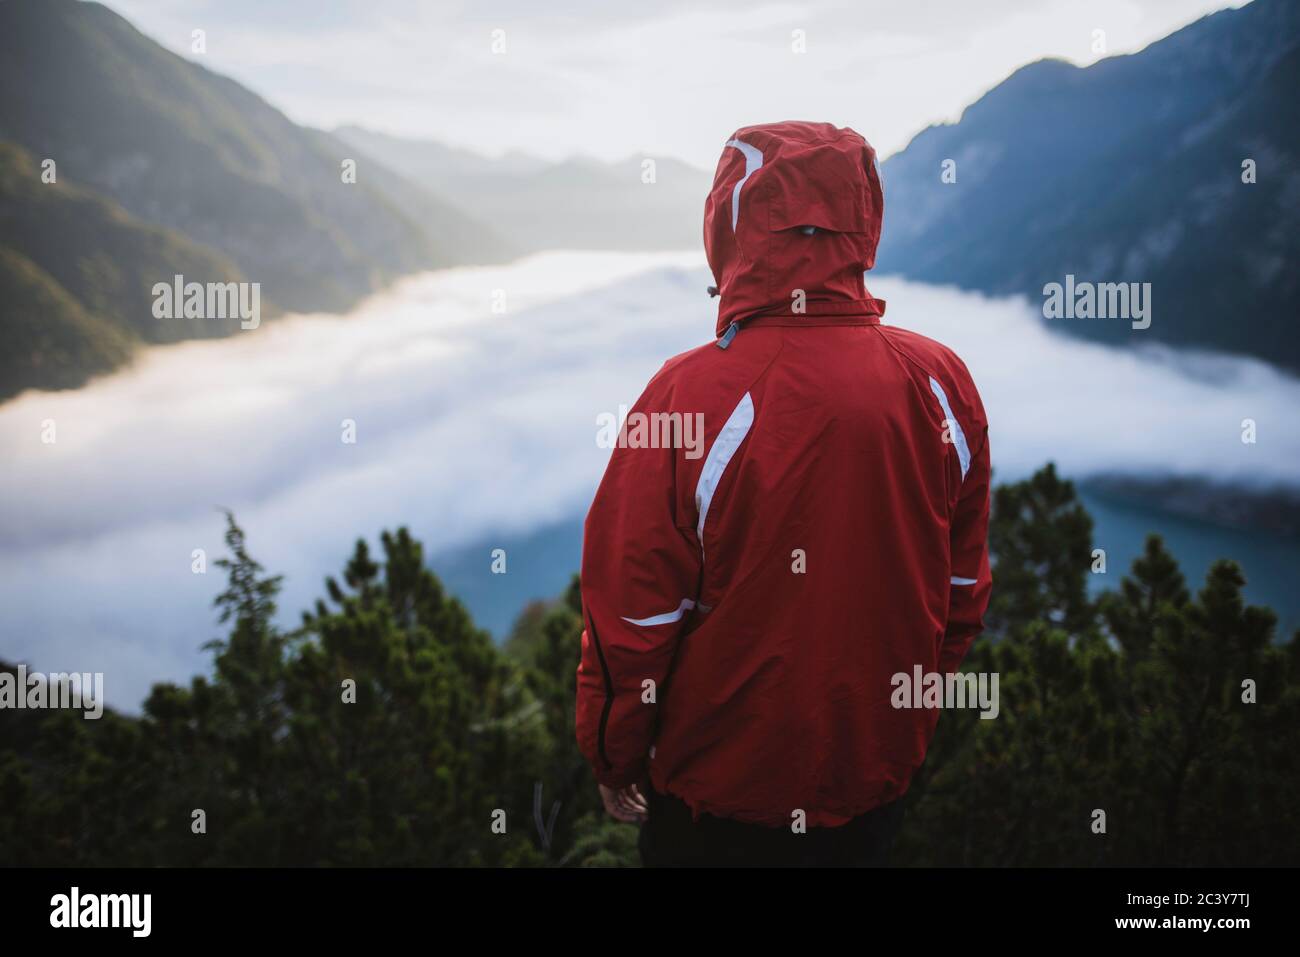 Austria, Plansee, Rear view of man in red jacket standing in Austrian Alps Stock Photo